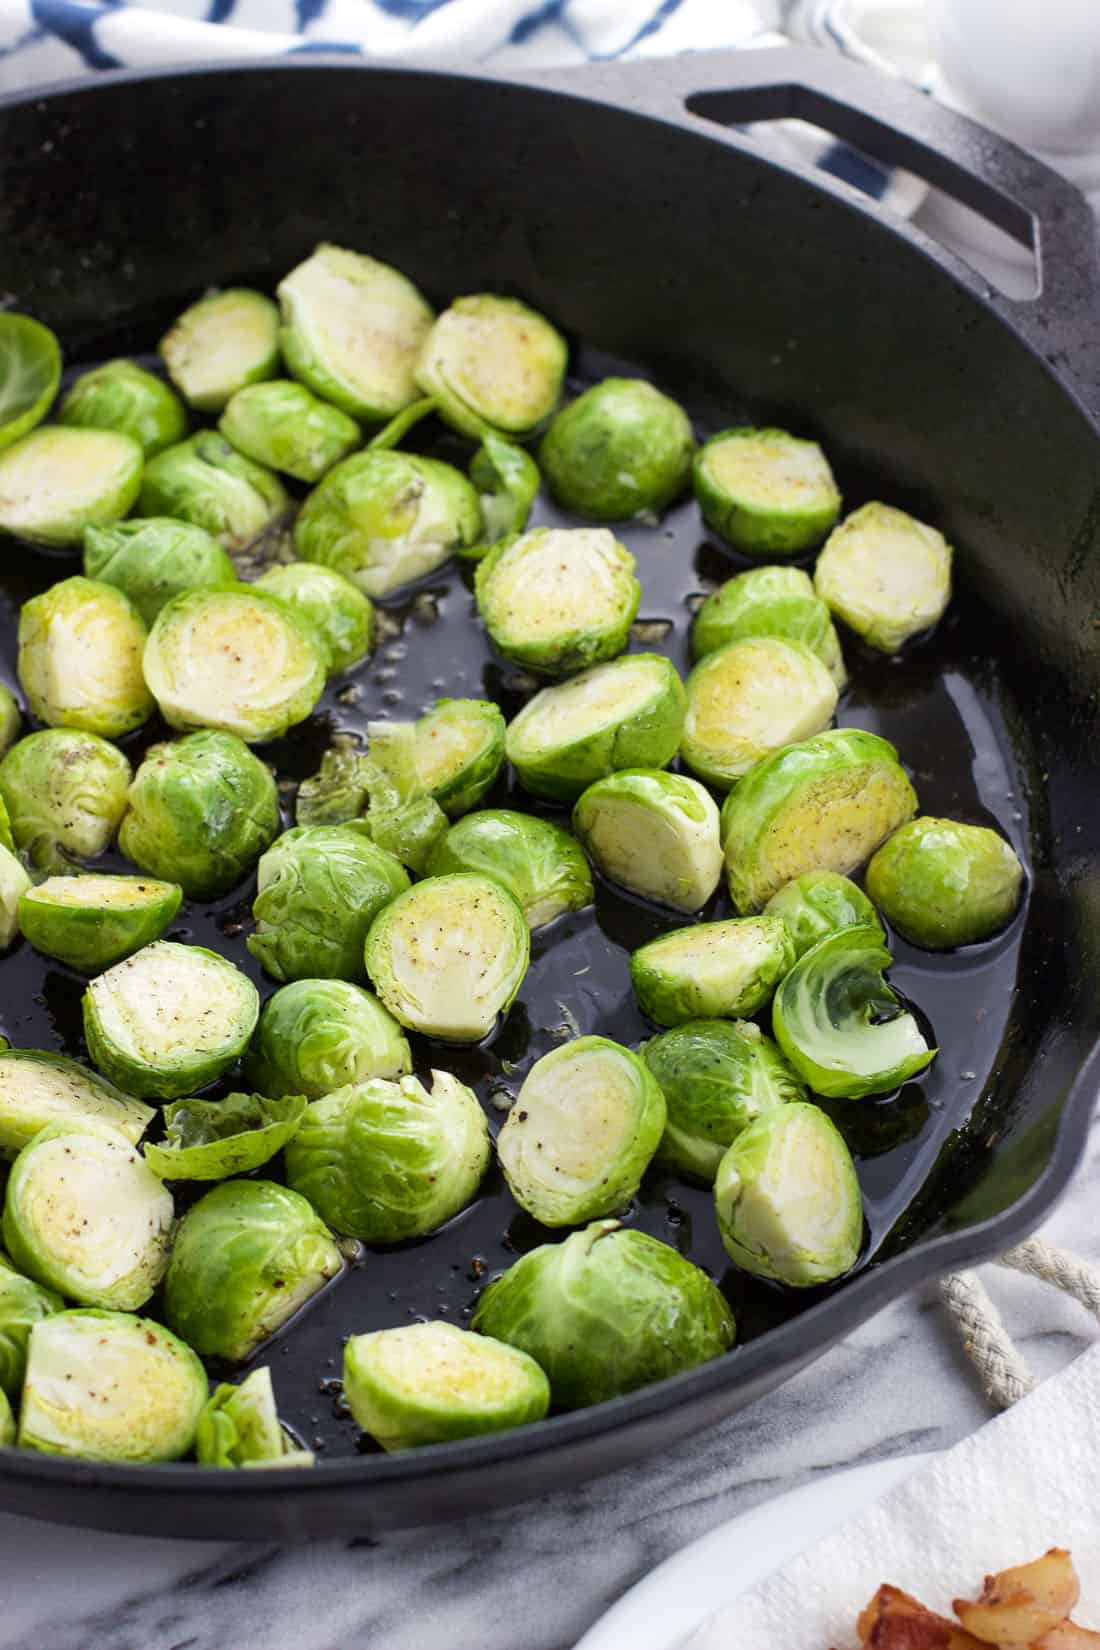 Halved brussels sprouts in a cast iron skillet